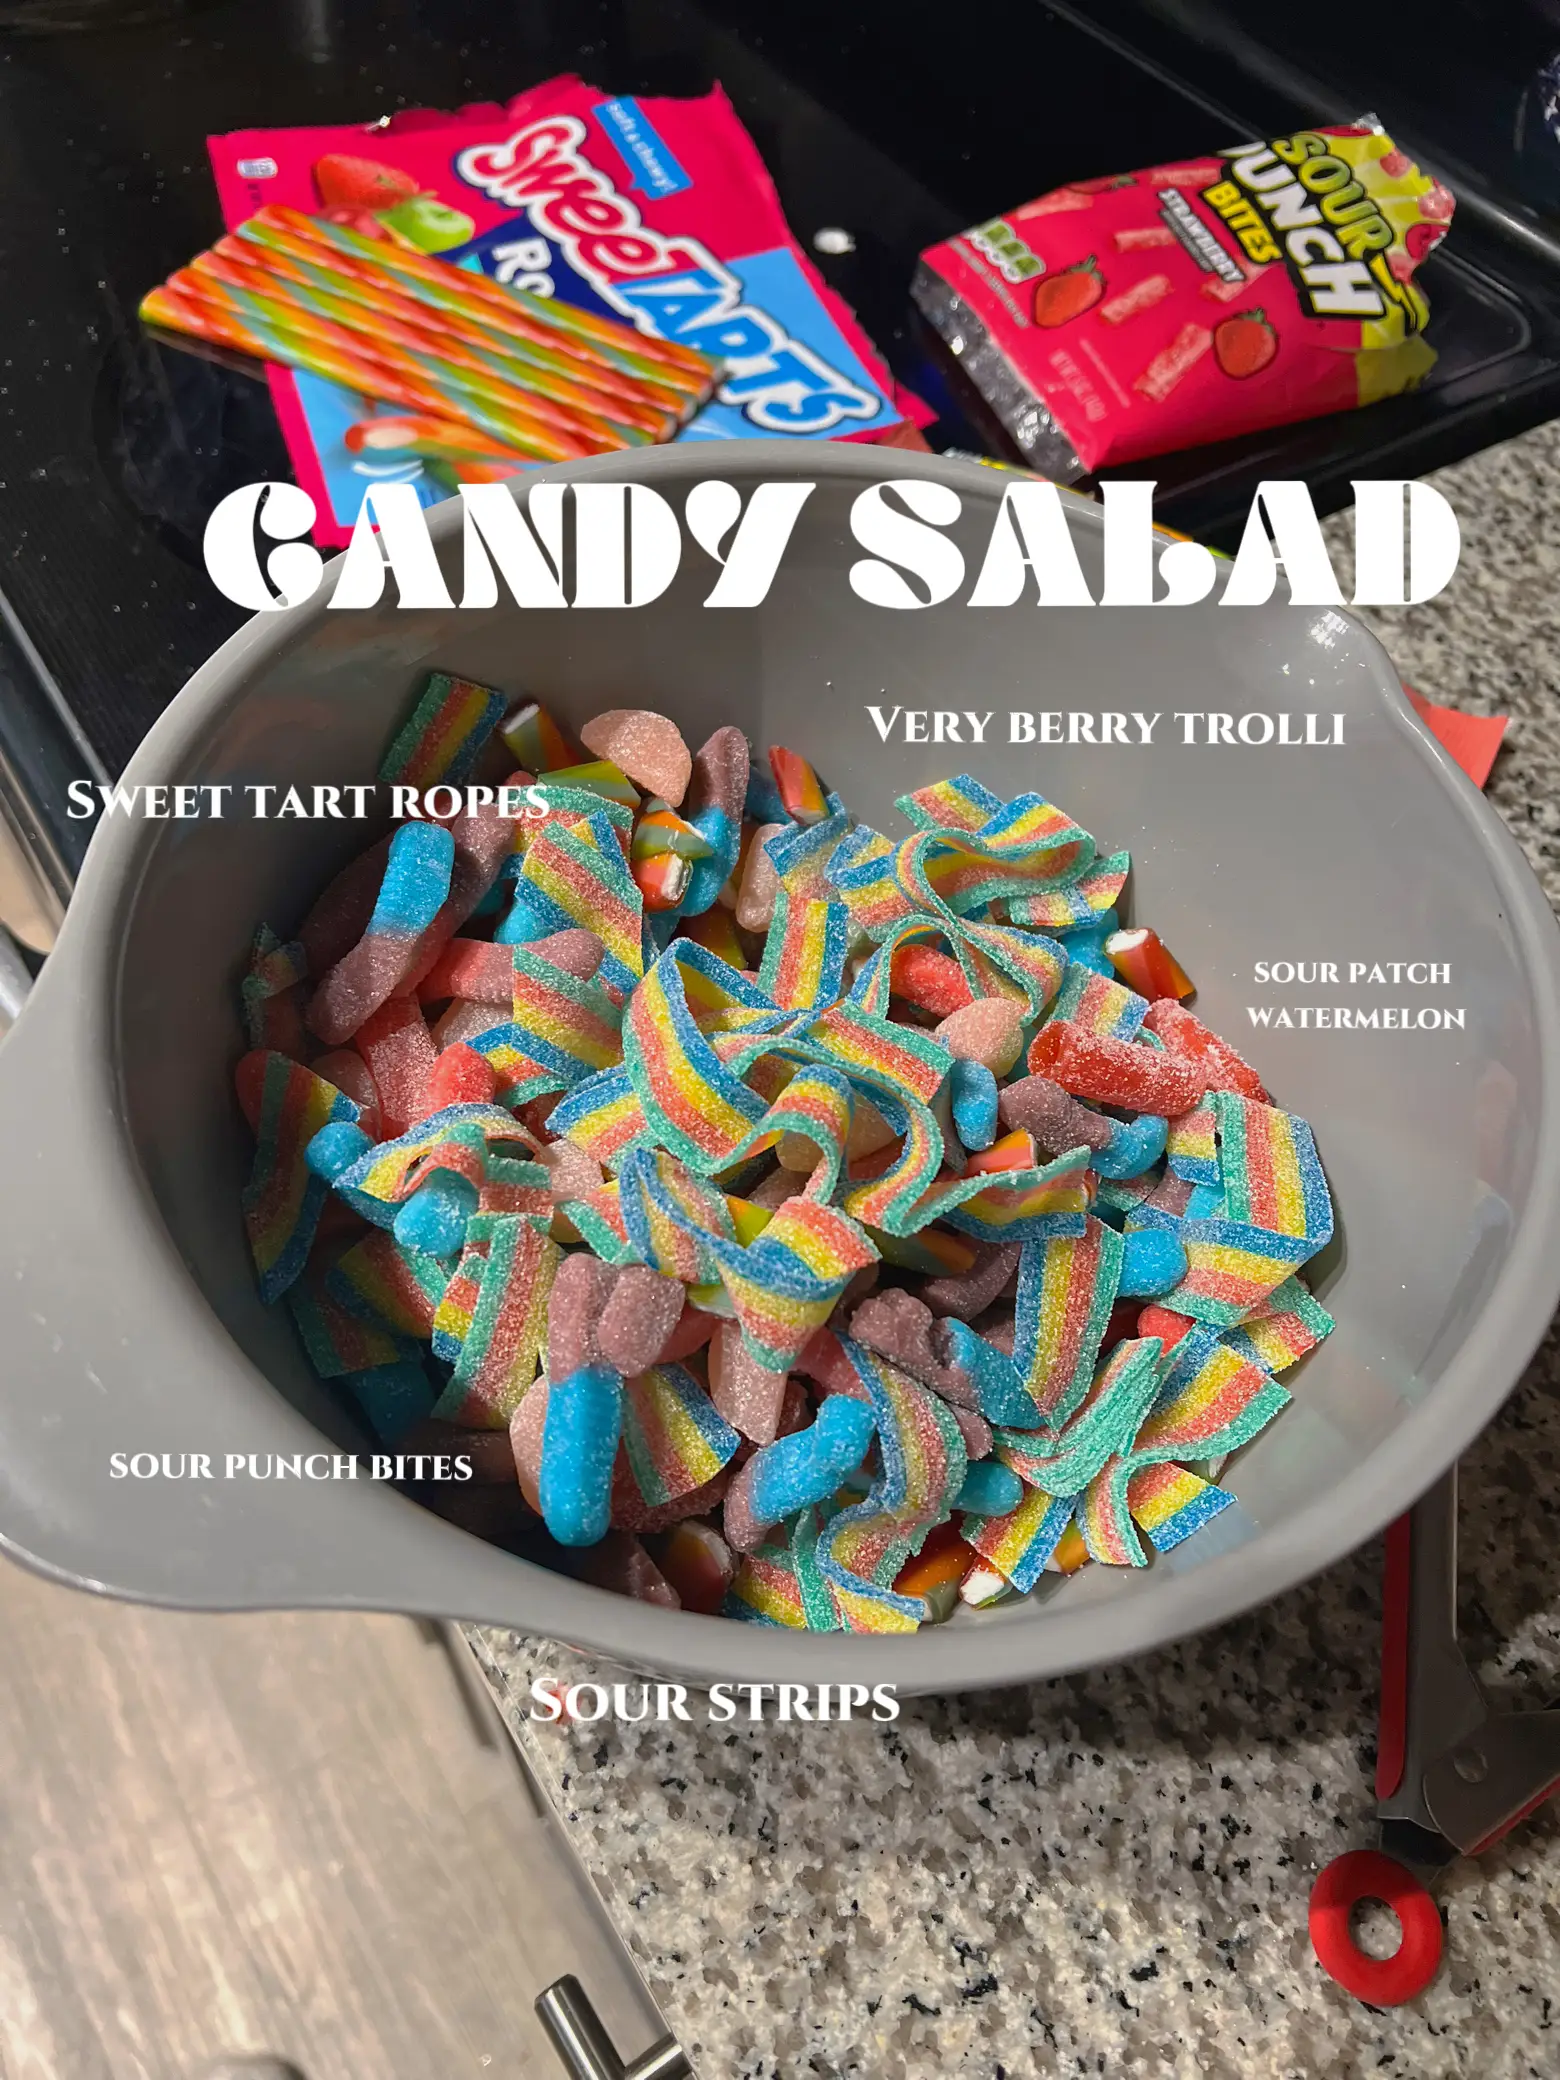 CANDY SALAD, Gallery posted by Delaneyanderson